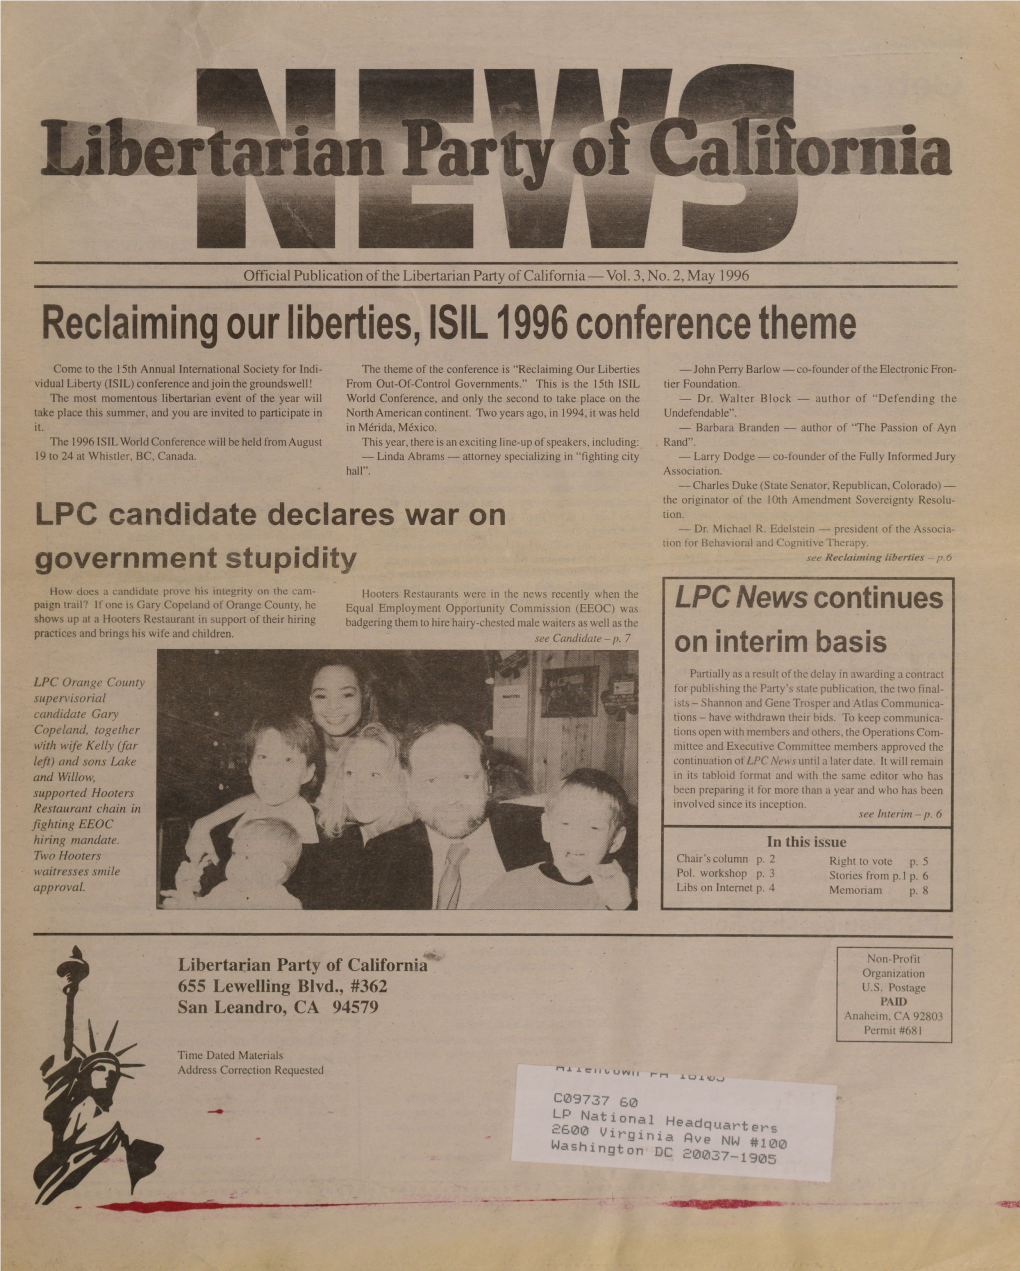 Reclaiming Our Liberties, ISIL1996 Conference Theme